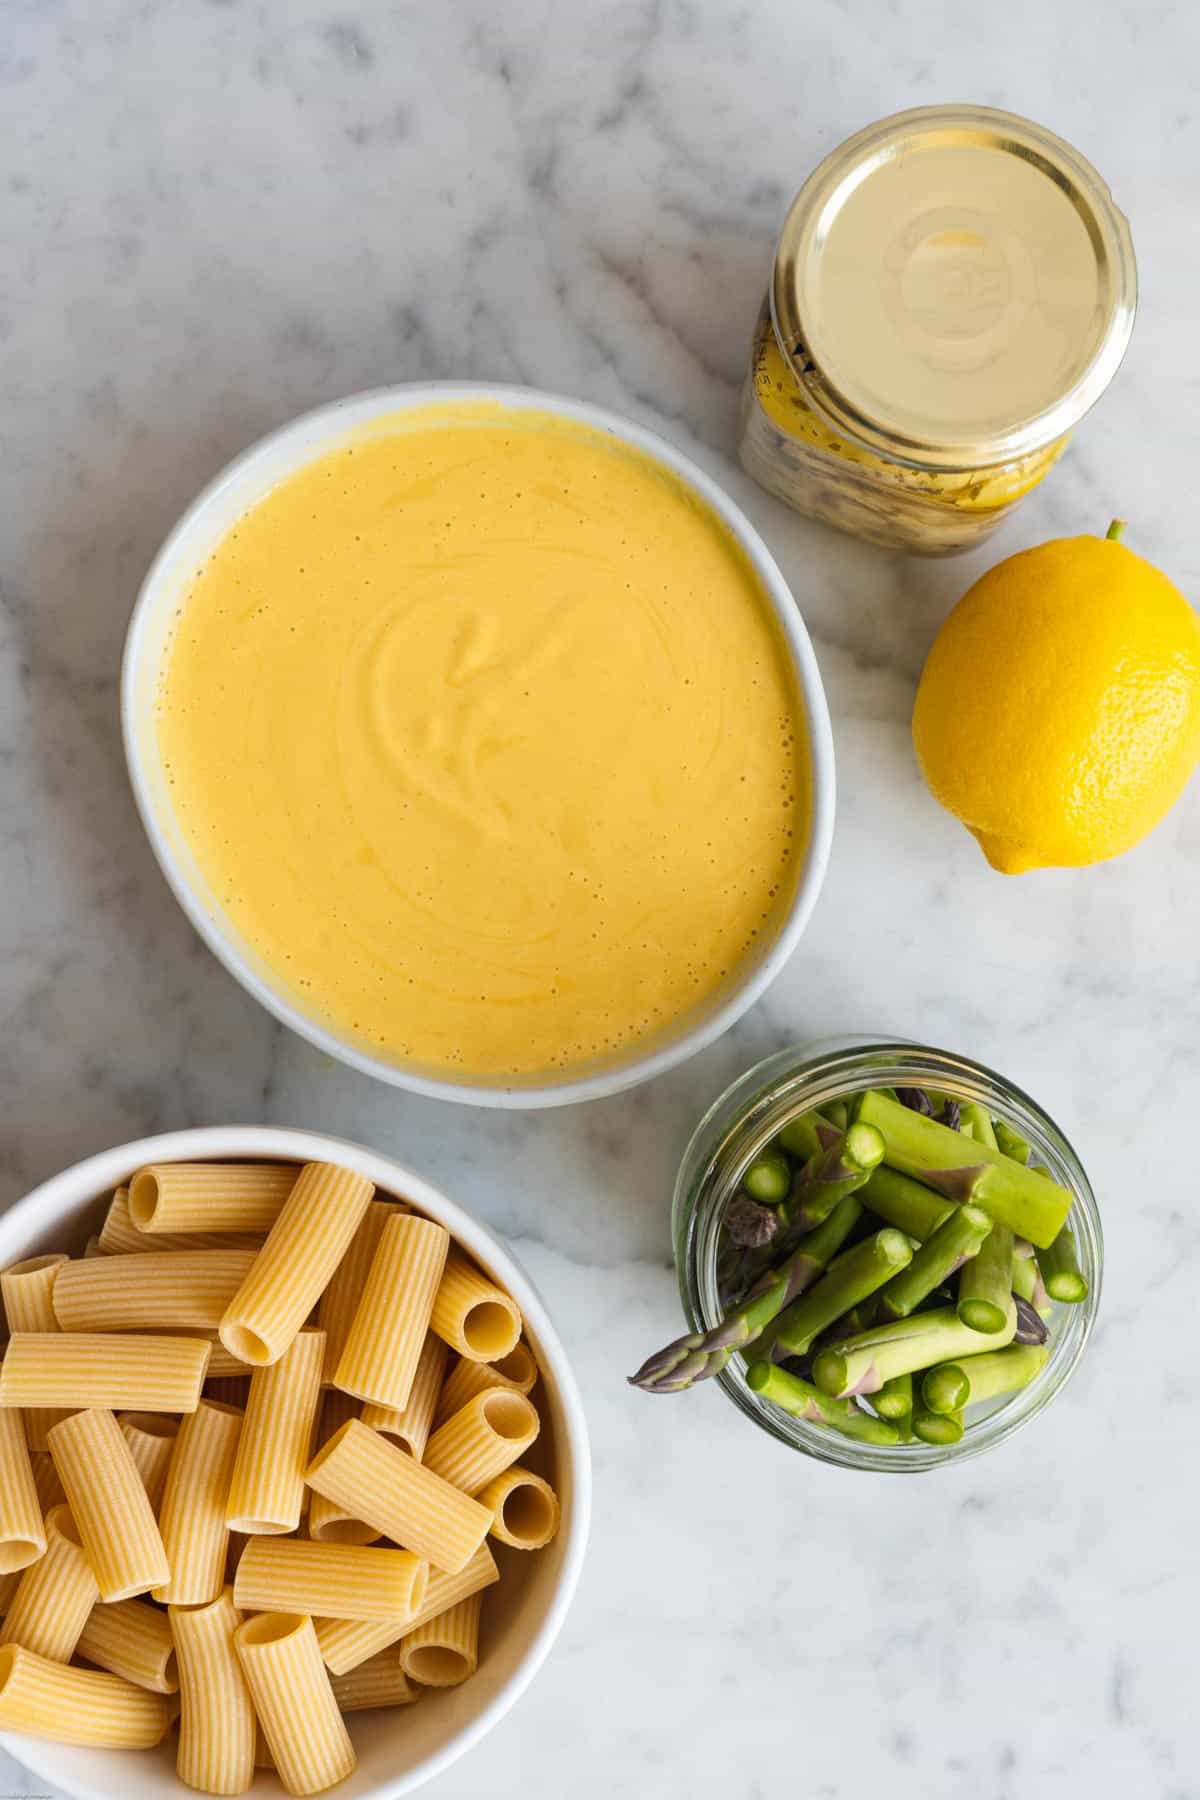 Rigatoni in a white bowl, cut asparagus spears in a glass jar, one lemon, jarred artichoke hearts, and Creamy Dairy-Free Nut-Free Lemon Pasta Sauce in. white bowl.